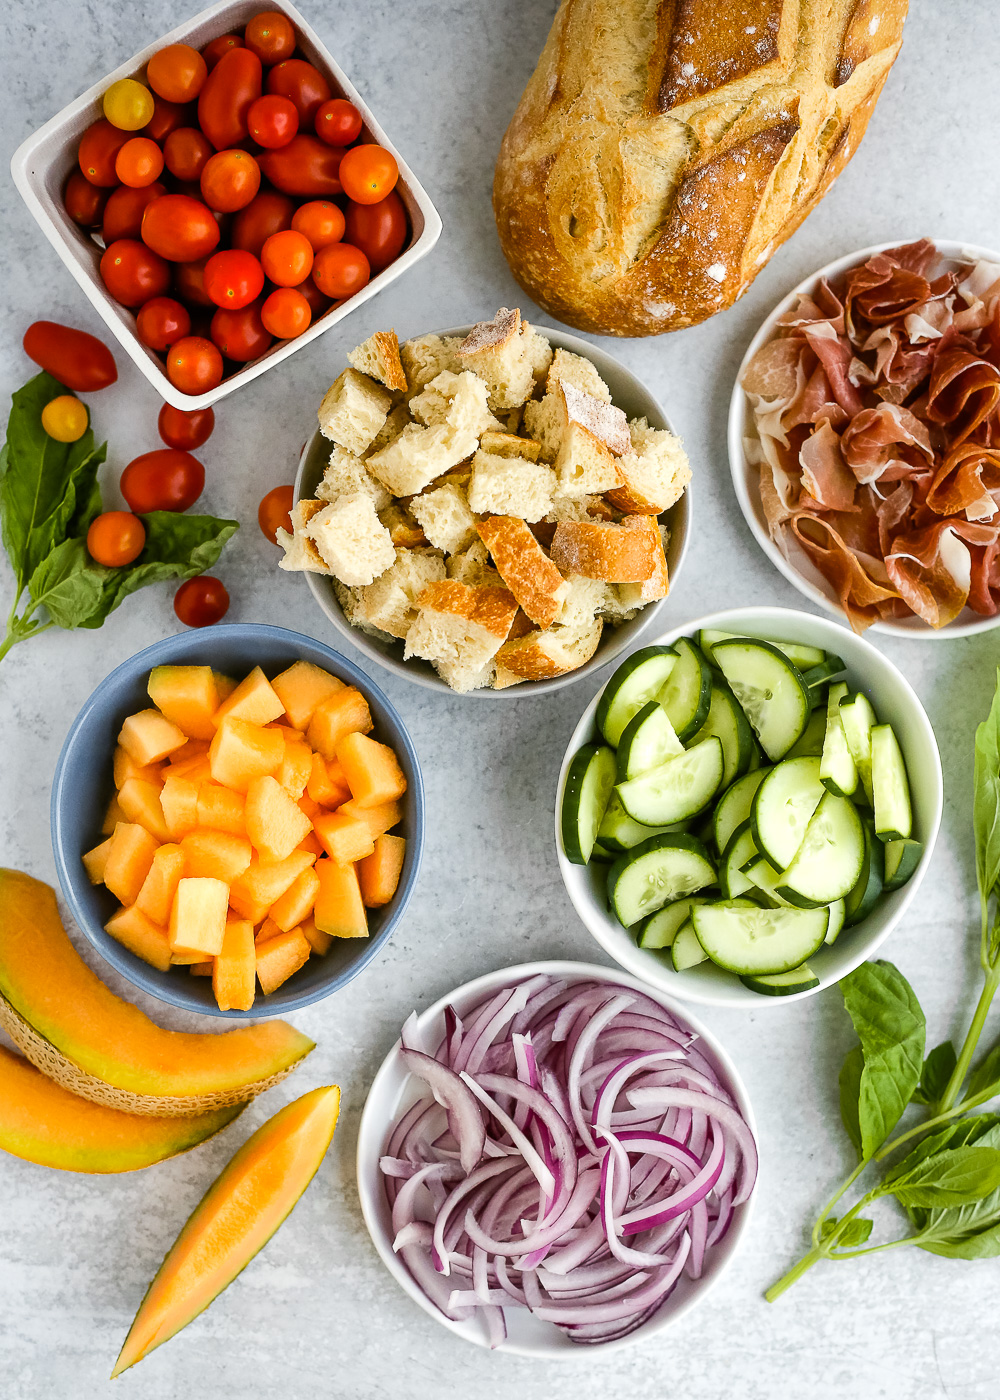 An overhead view of all the ingredients for a summer panzanella salad recipe on a light grey background, including a loaf of Italian bread, tomatoes, prosciutto, basil, cucumbers, cantaloupe, and red onion